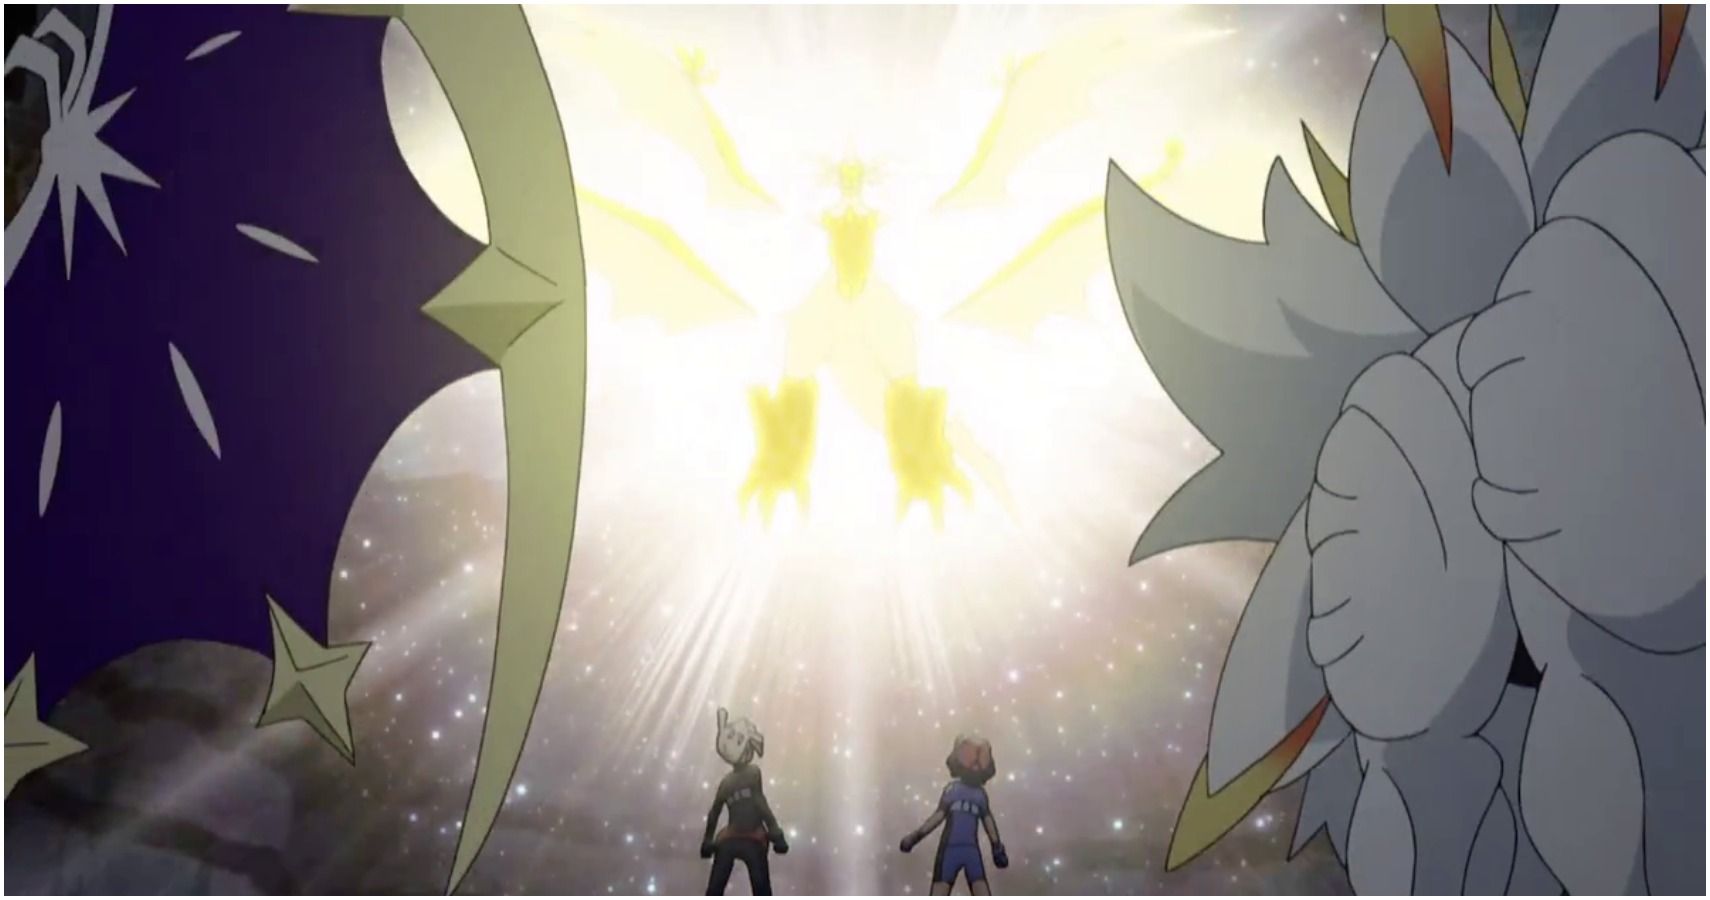 Pokémon Sun and Moon: How to Catch the Ultra Beasts and Necrozma